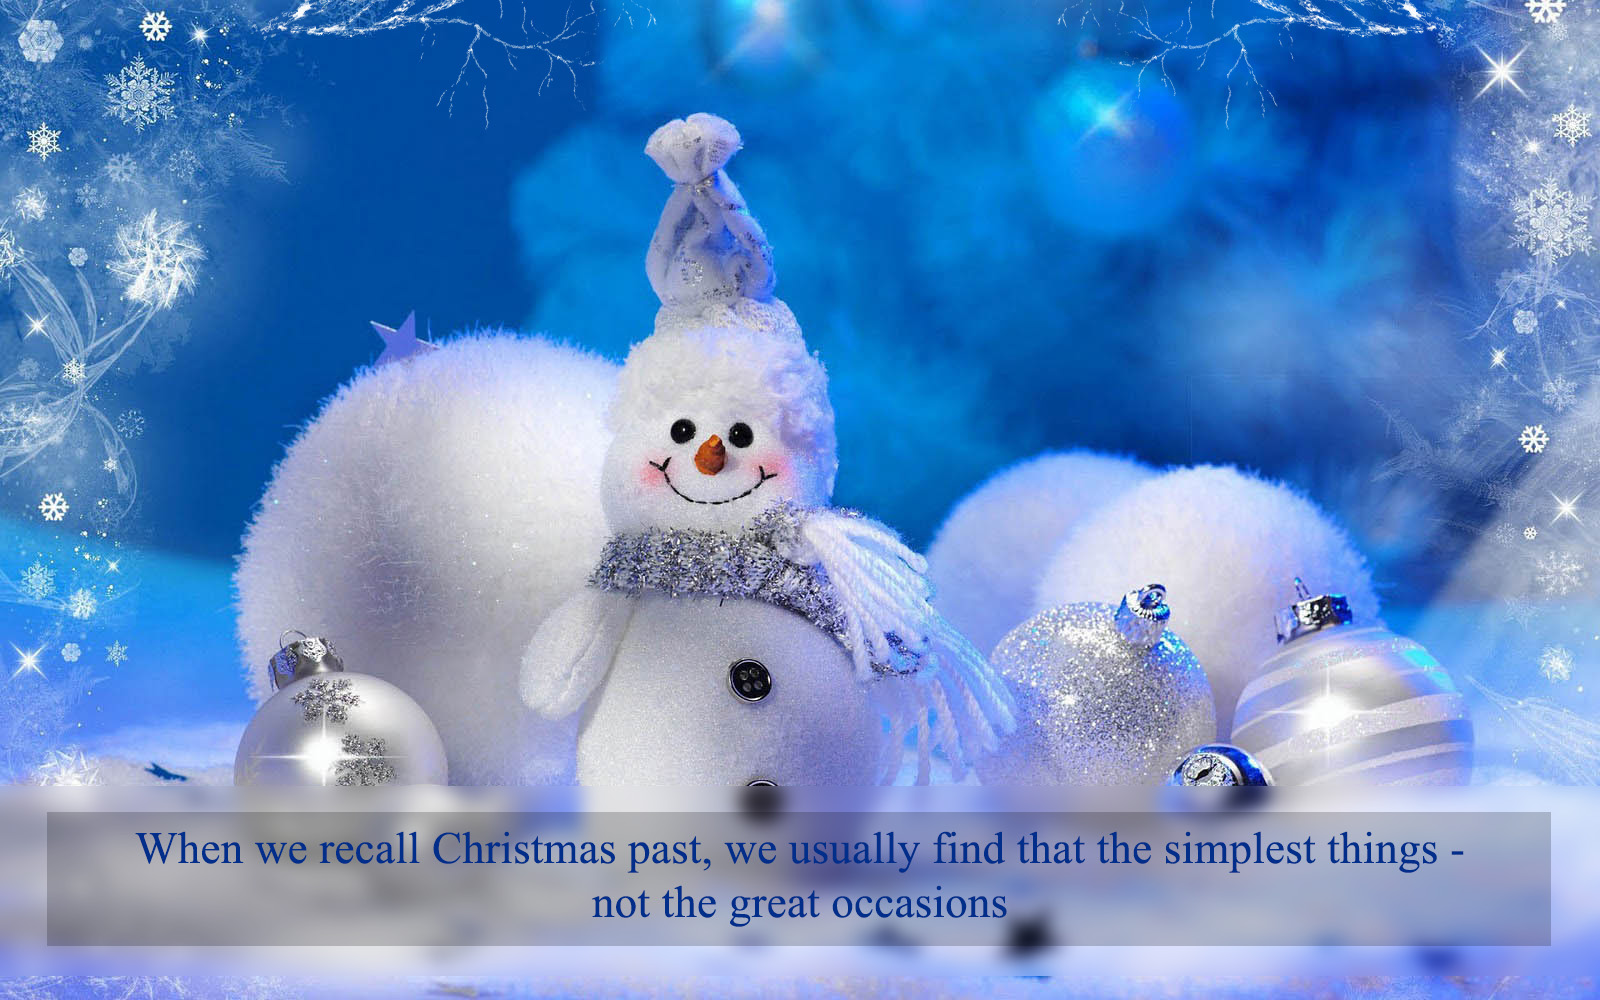 Merry Christmas 2021 Inspirational Quotes